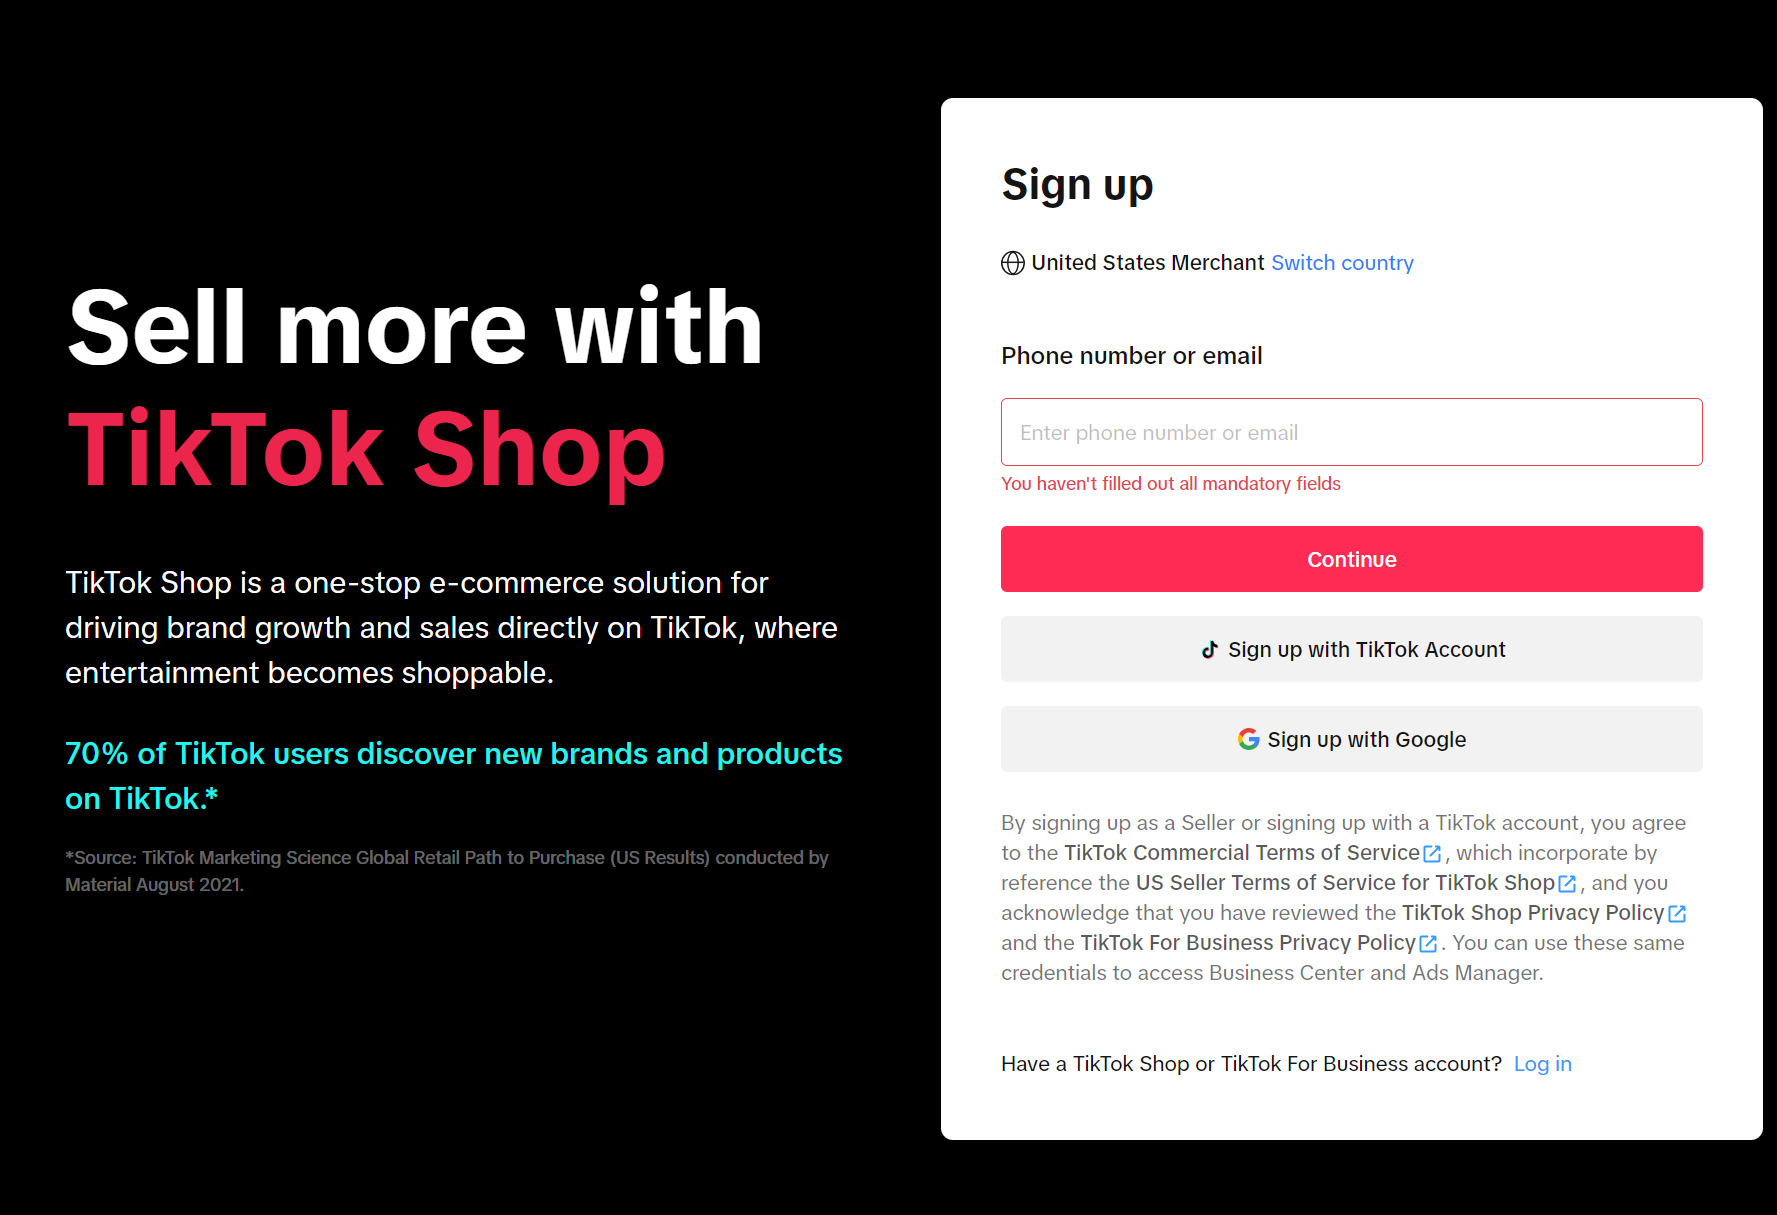 TikTok Shop registration page for sellers in the United States